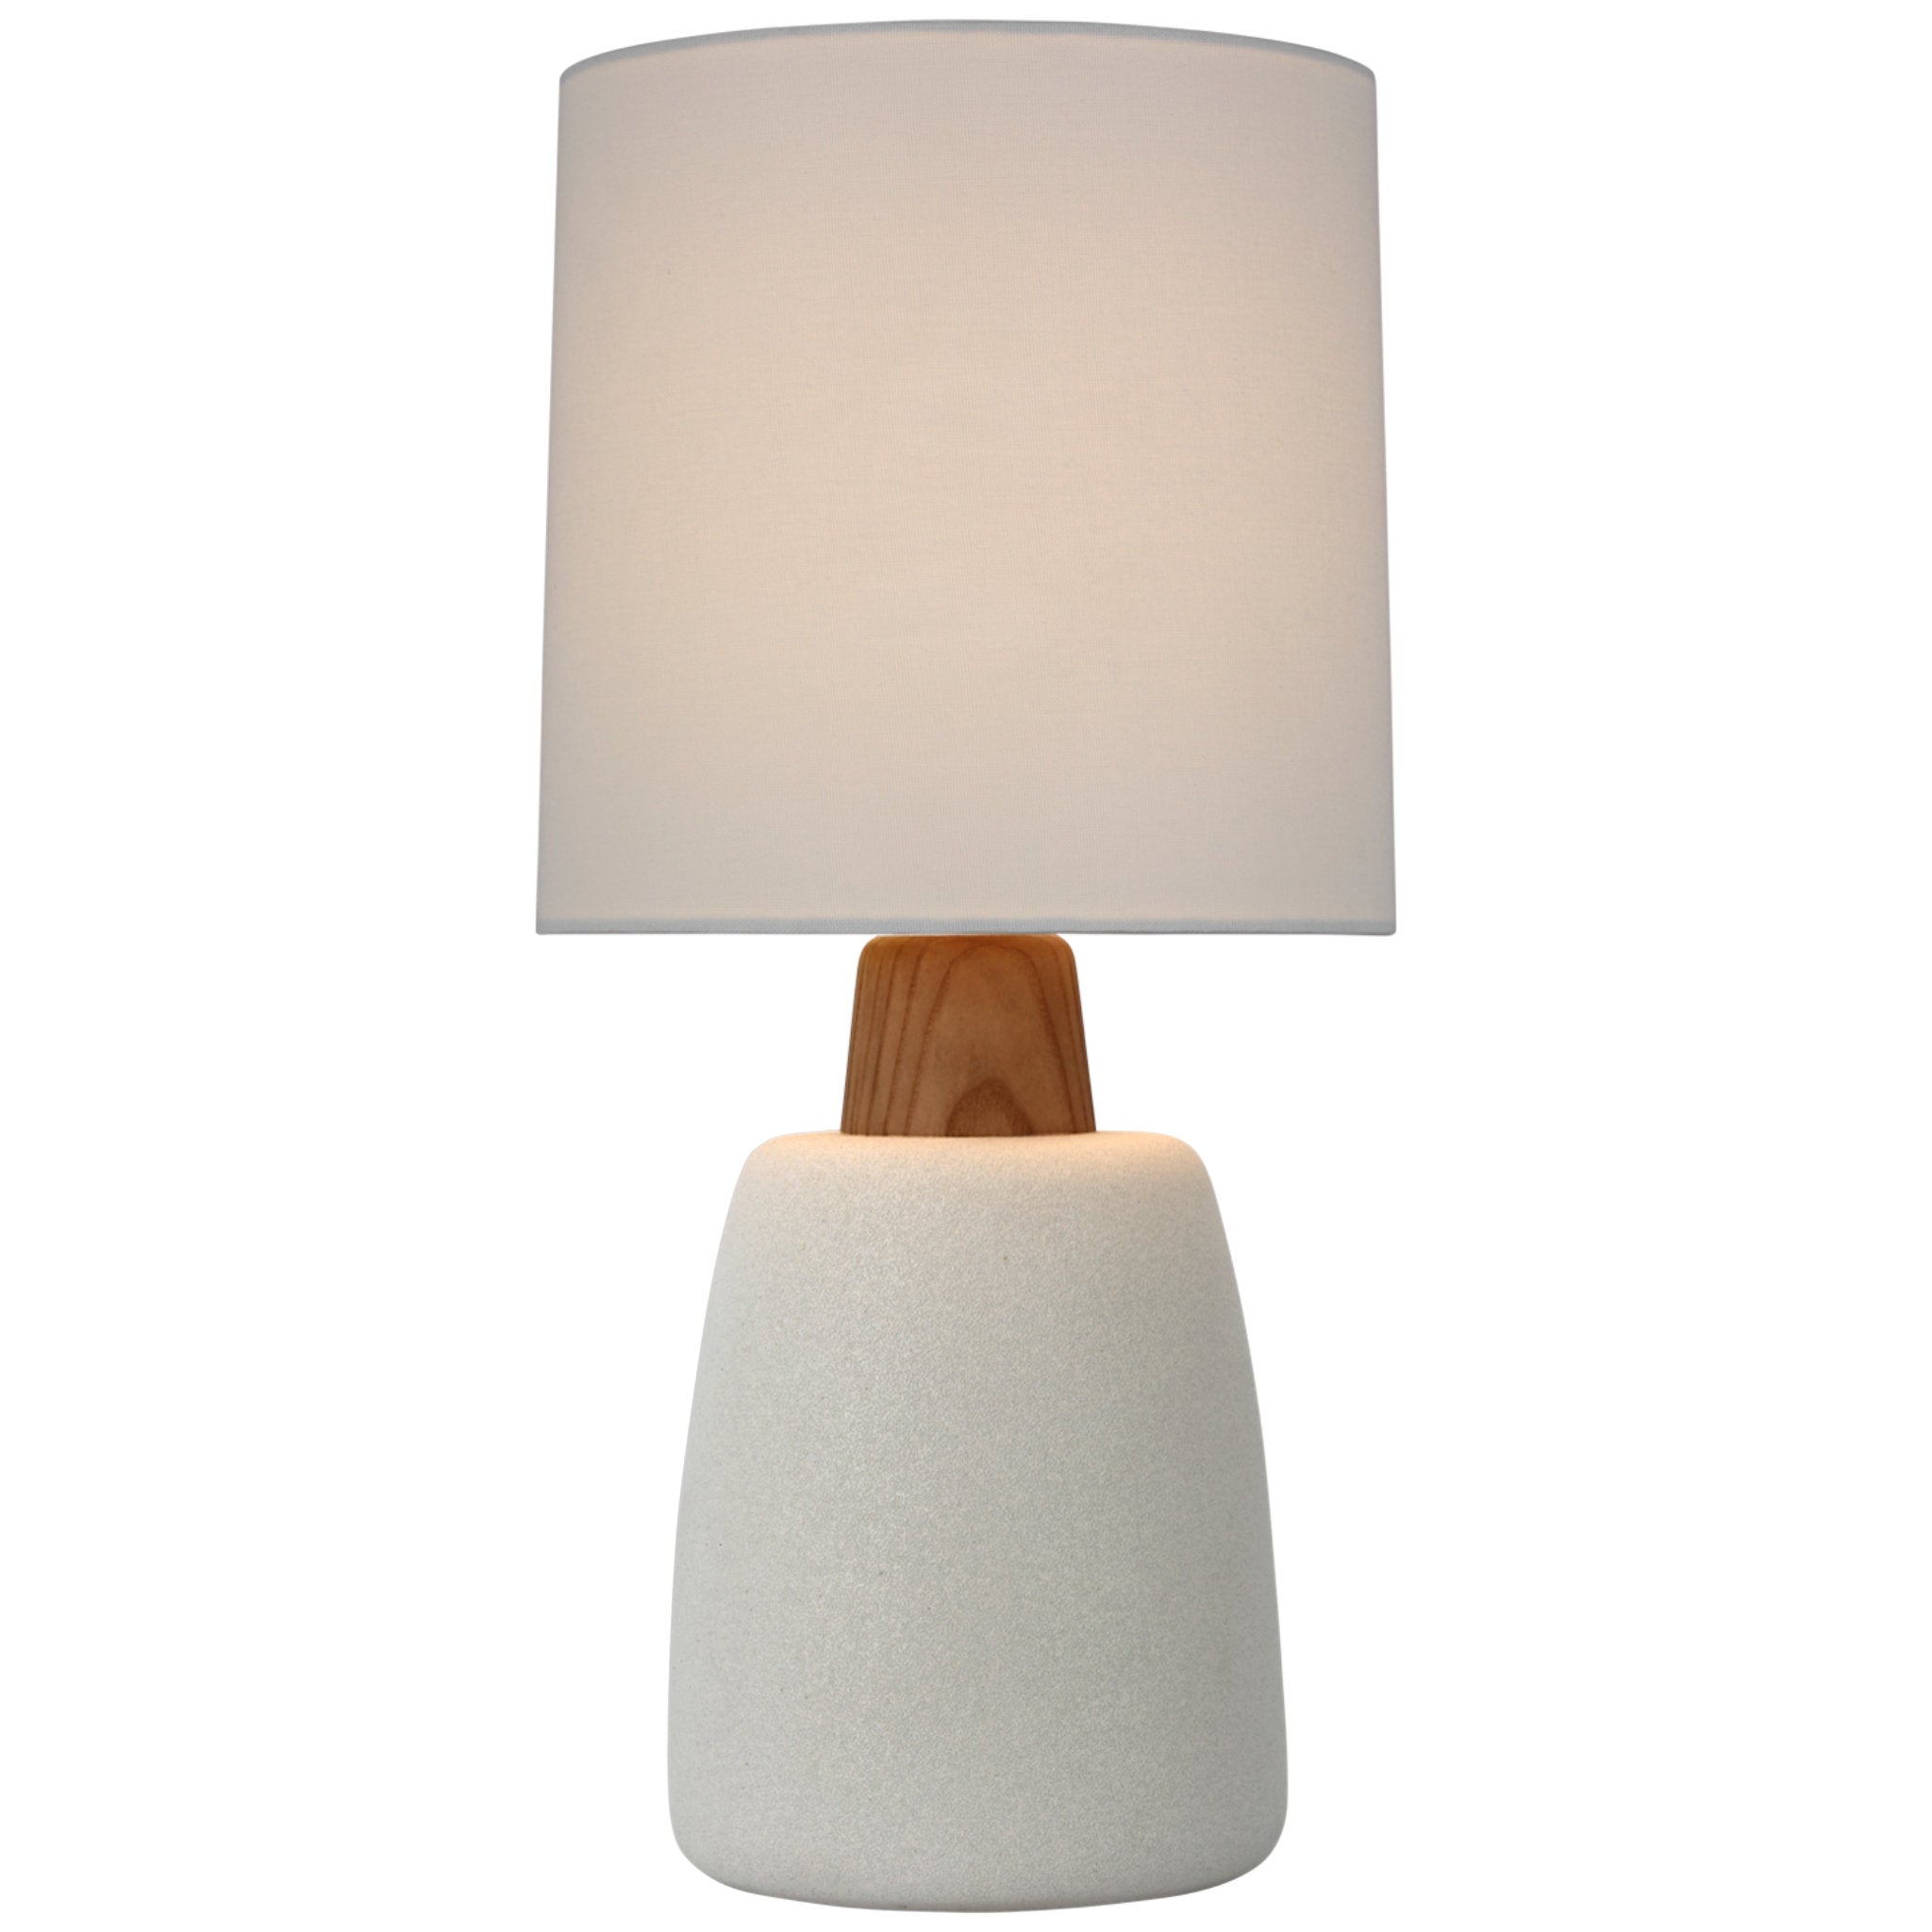 Barbara Barry Aida Medium Table Lamp in Porous White and Natural Oak with Linen Shade